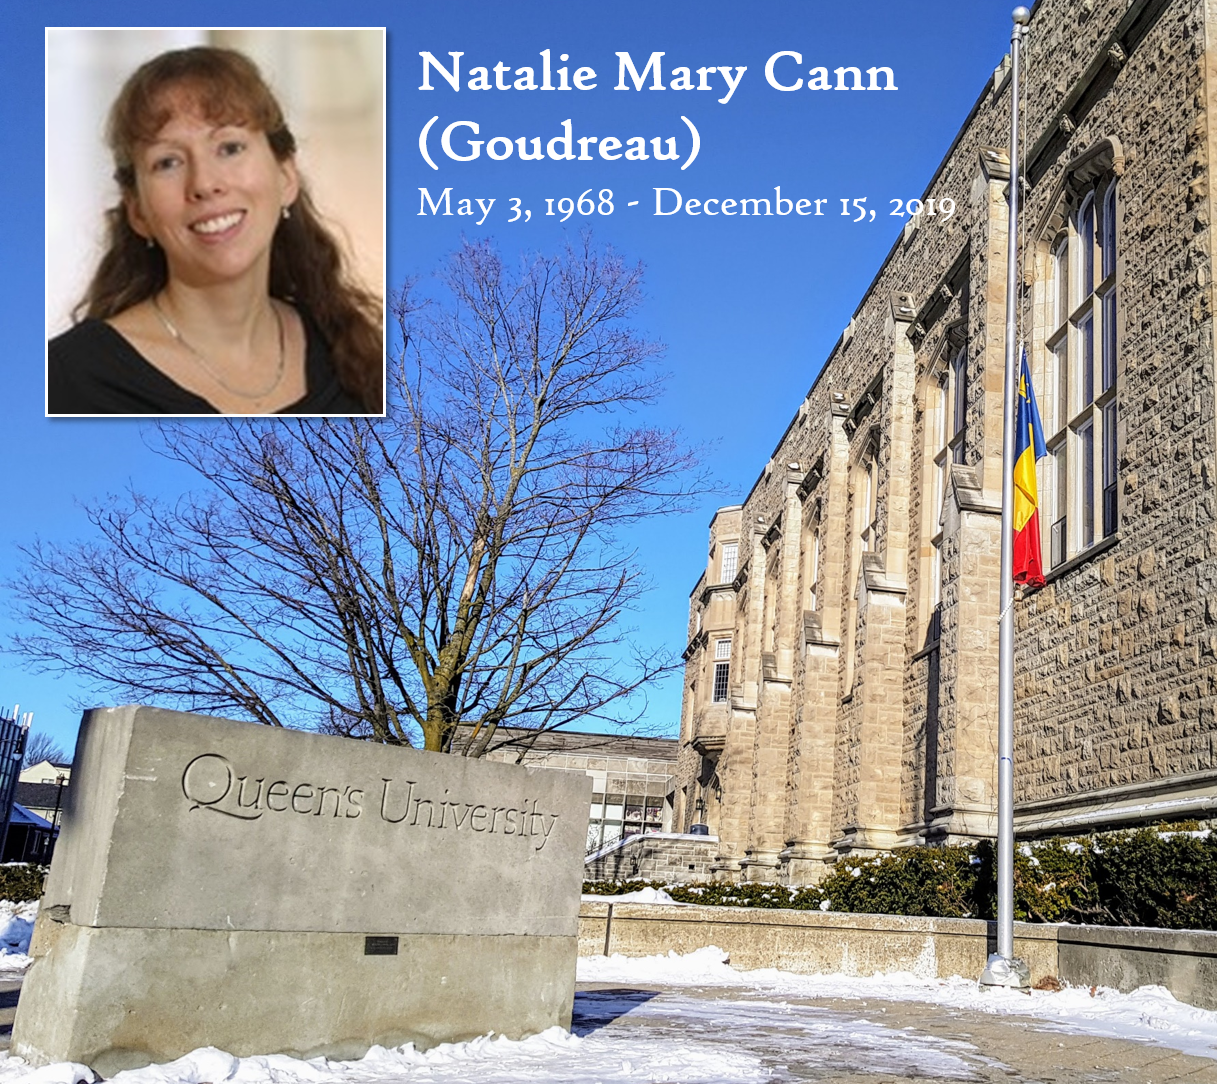 Photo: In memory of Dr. Natalie Cann